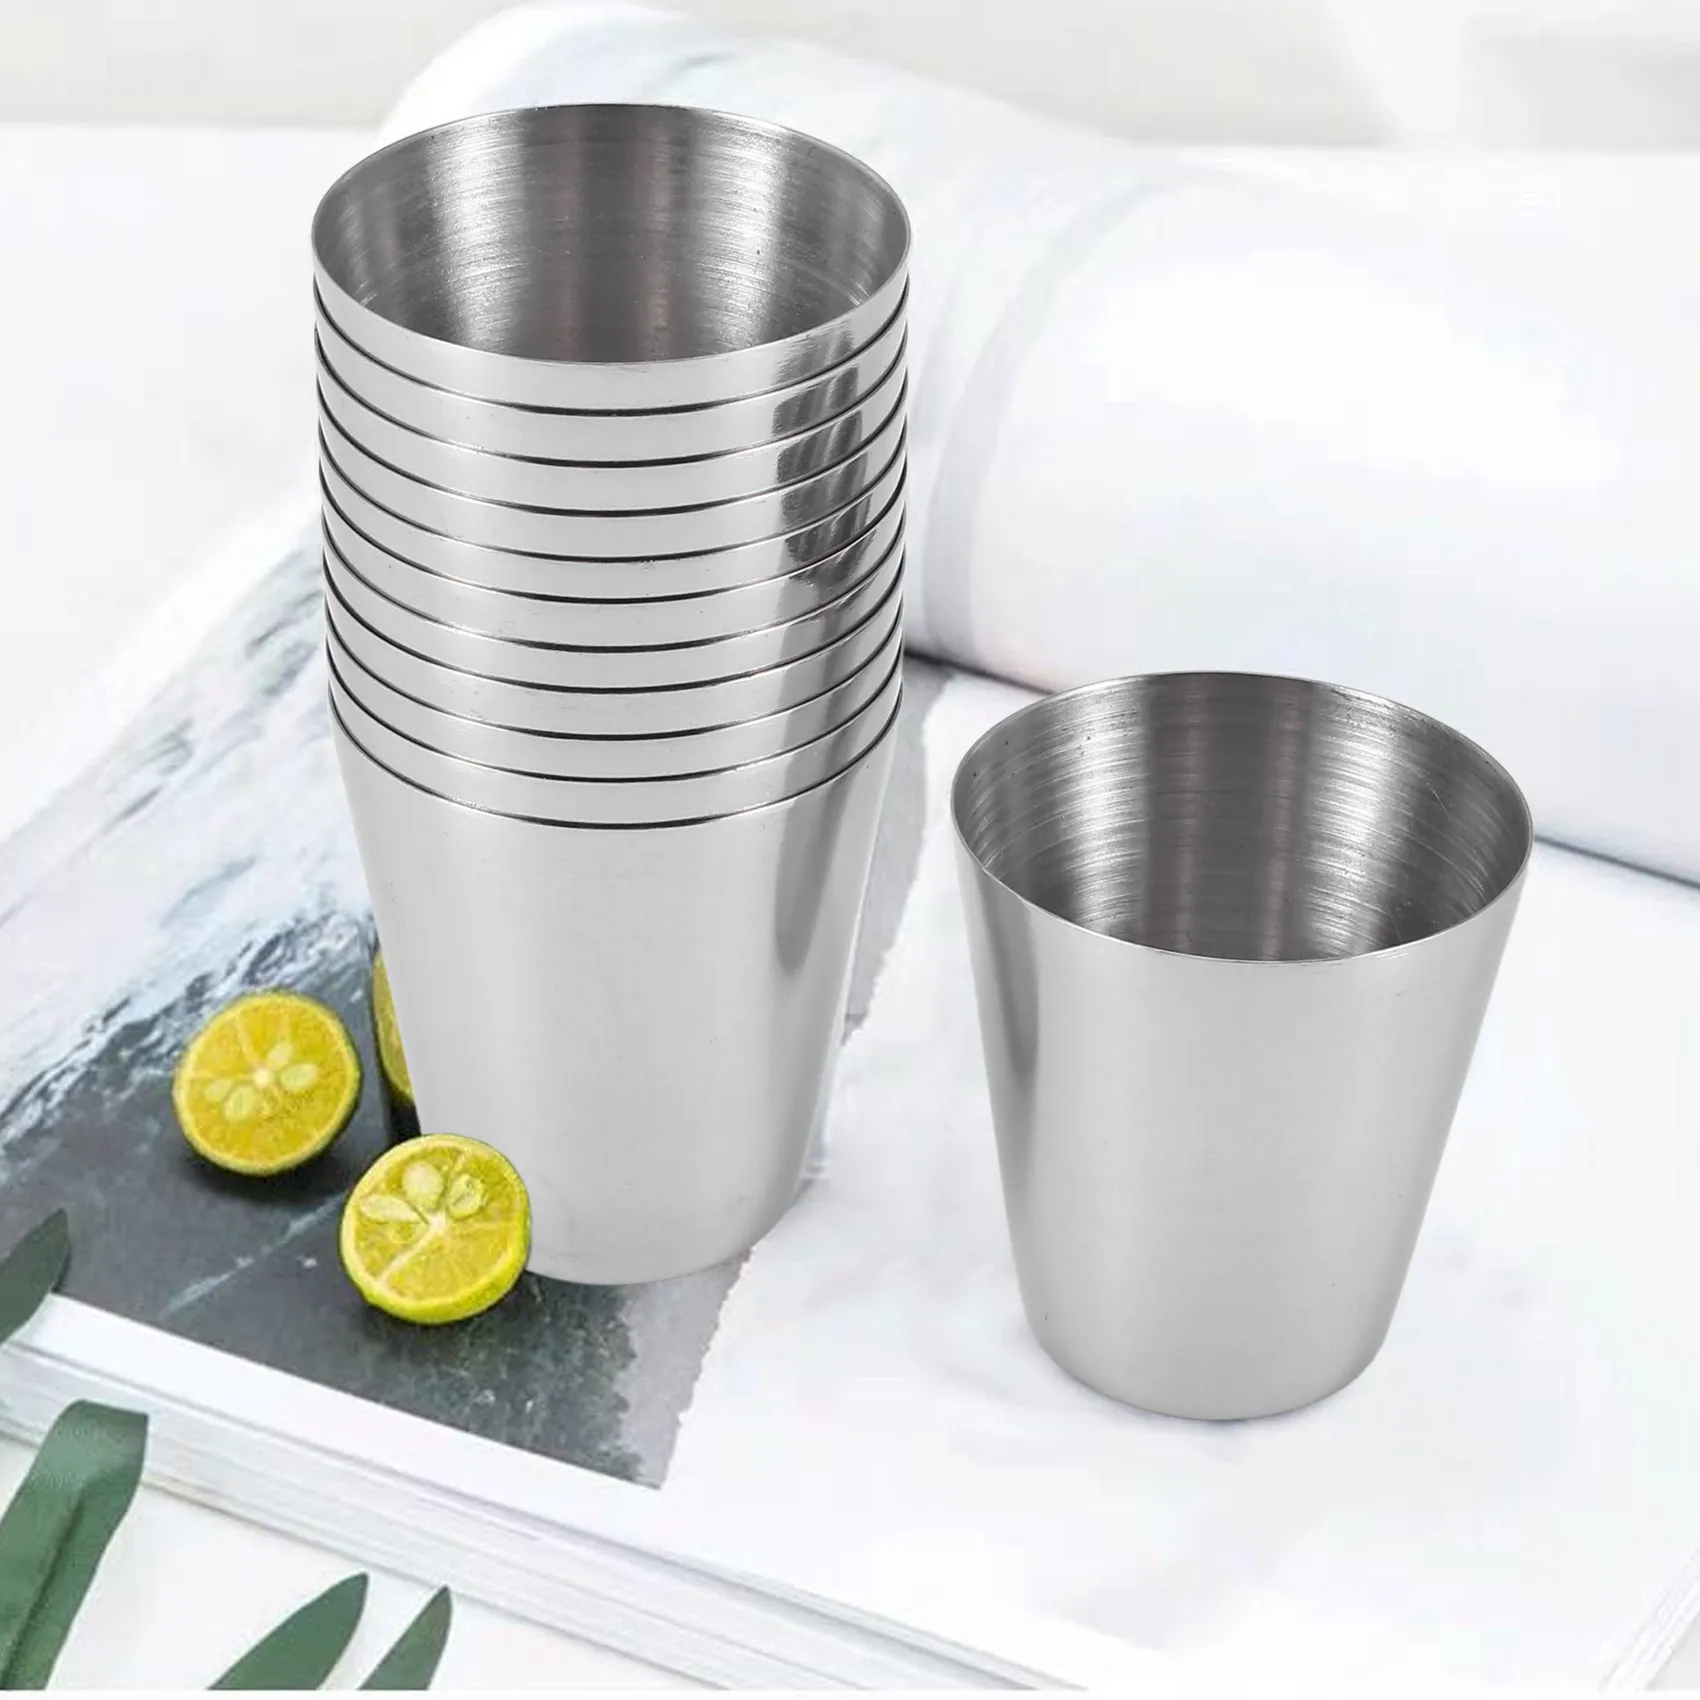 

15 Pcs Stainless Steel Shot Glasses Drinking Vessel,30Ml(1Oz) Camping Travel Coffee Tea Cup,for Whiskey Tequila Liquor